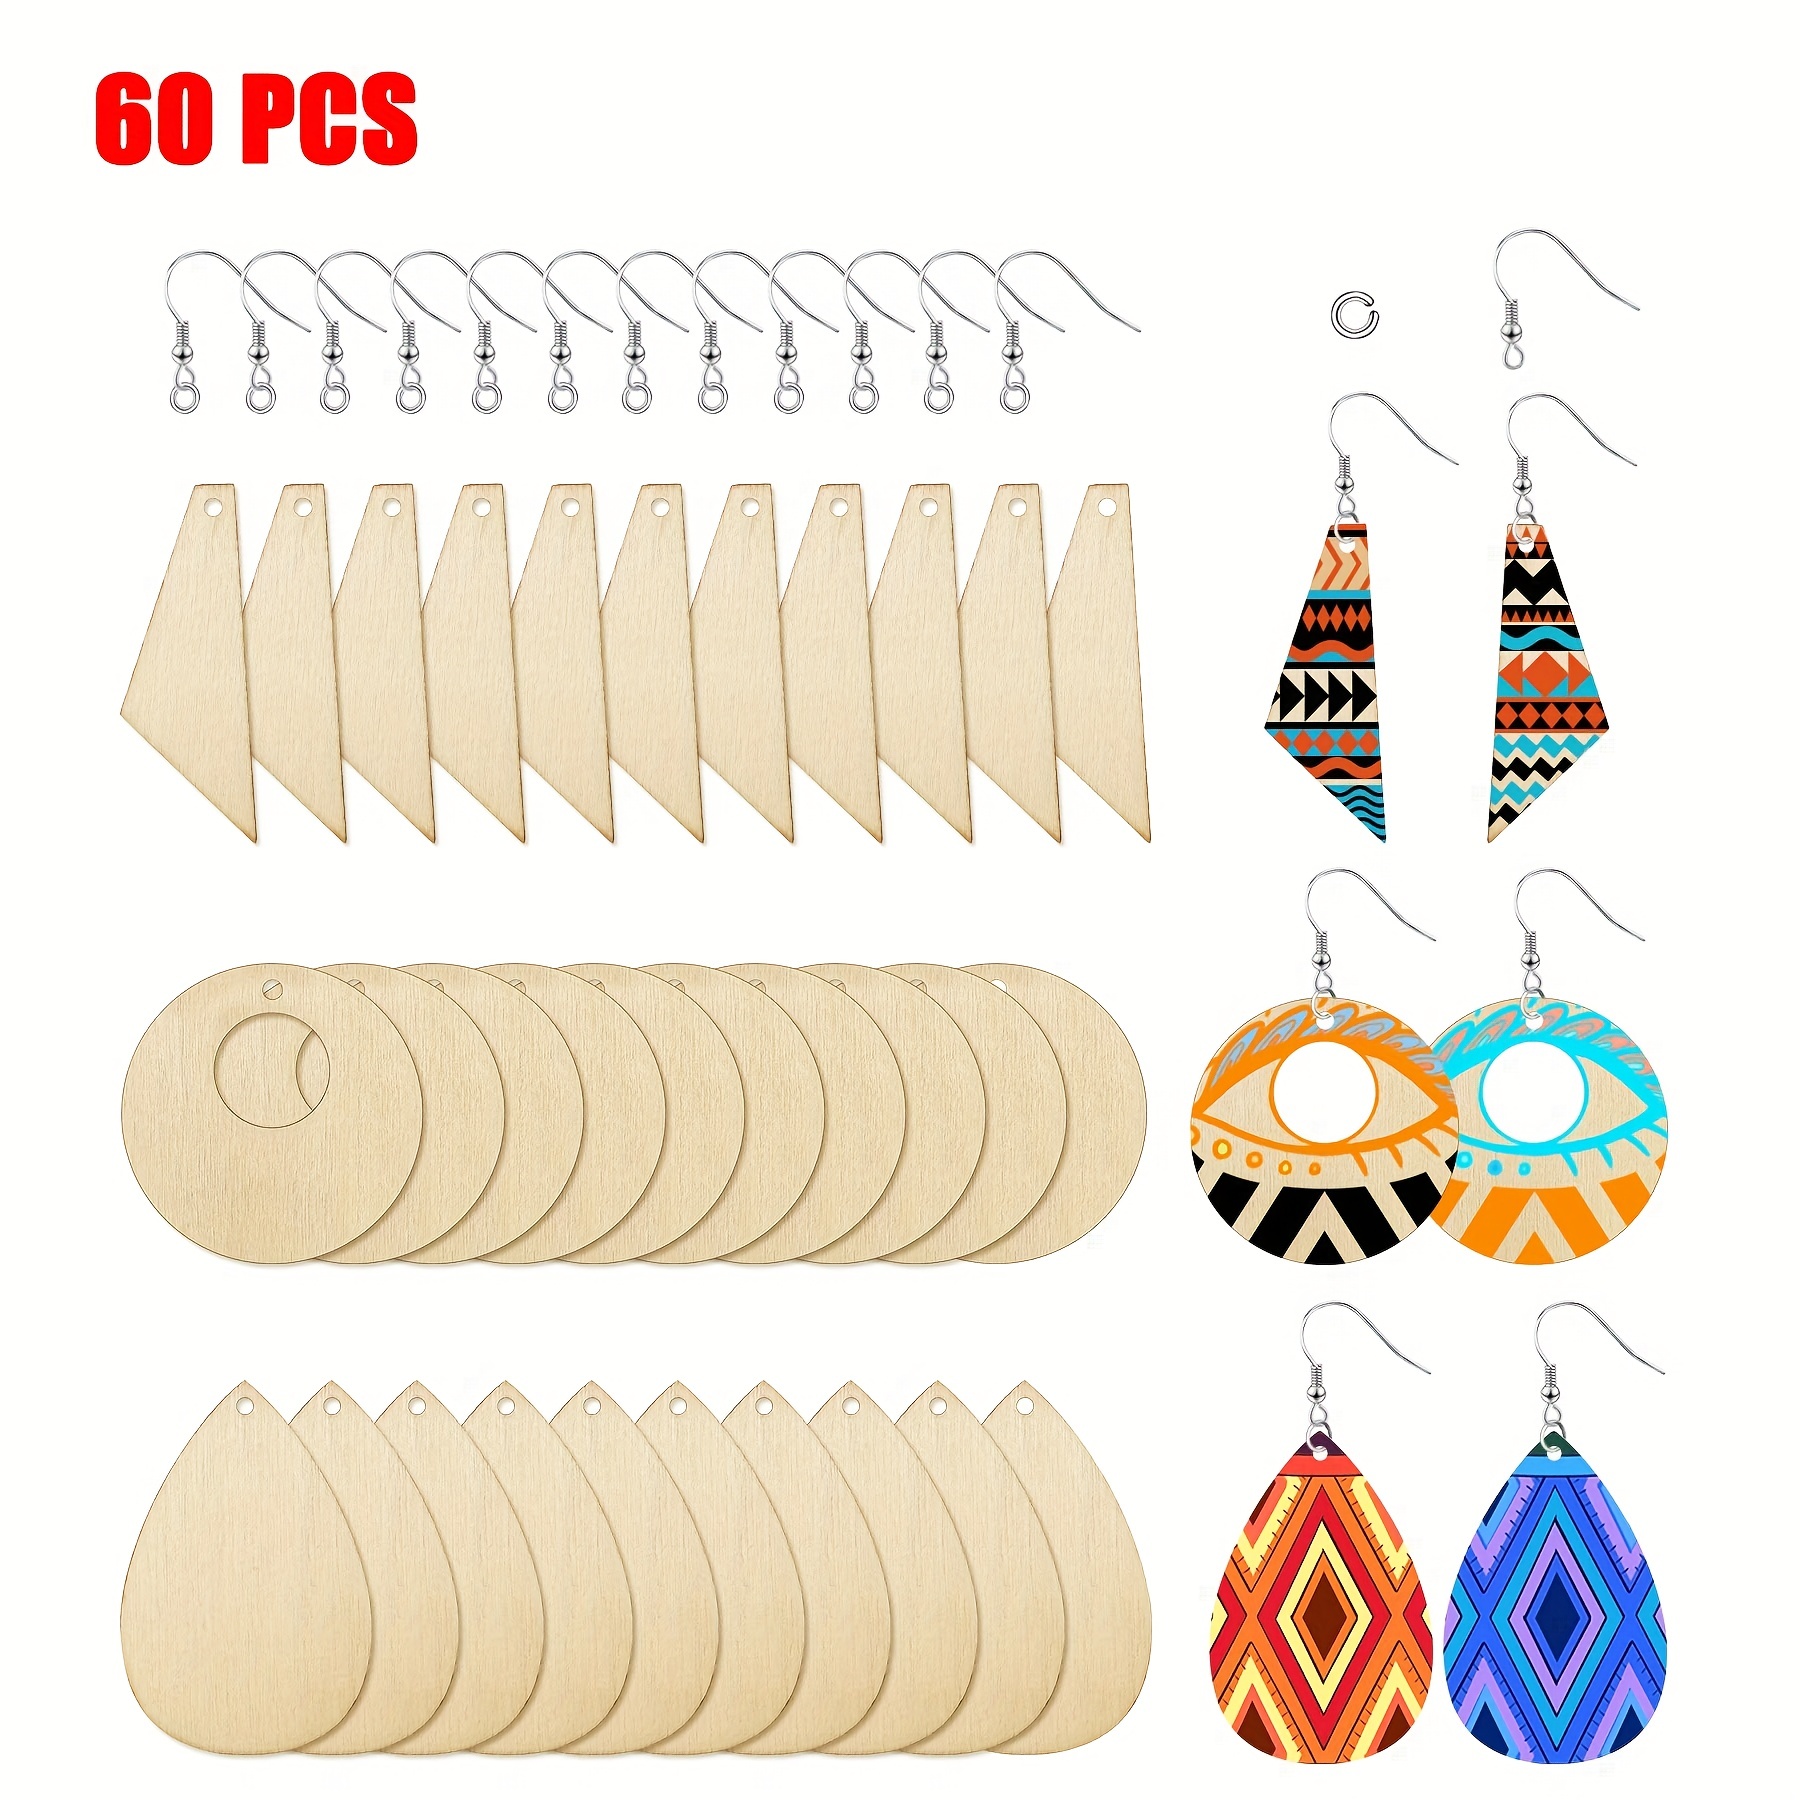 

60pcs Wooden Earrings Pendants Blank Teardrop,toroidal And Tapered Cutout Pendants With 60pcs Earring Hooks And 60pcs Jump Rings, For Diy Craft Jewelry Making